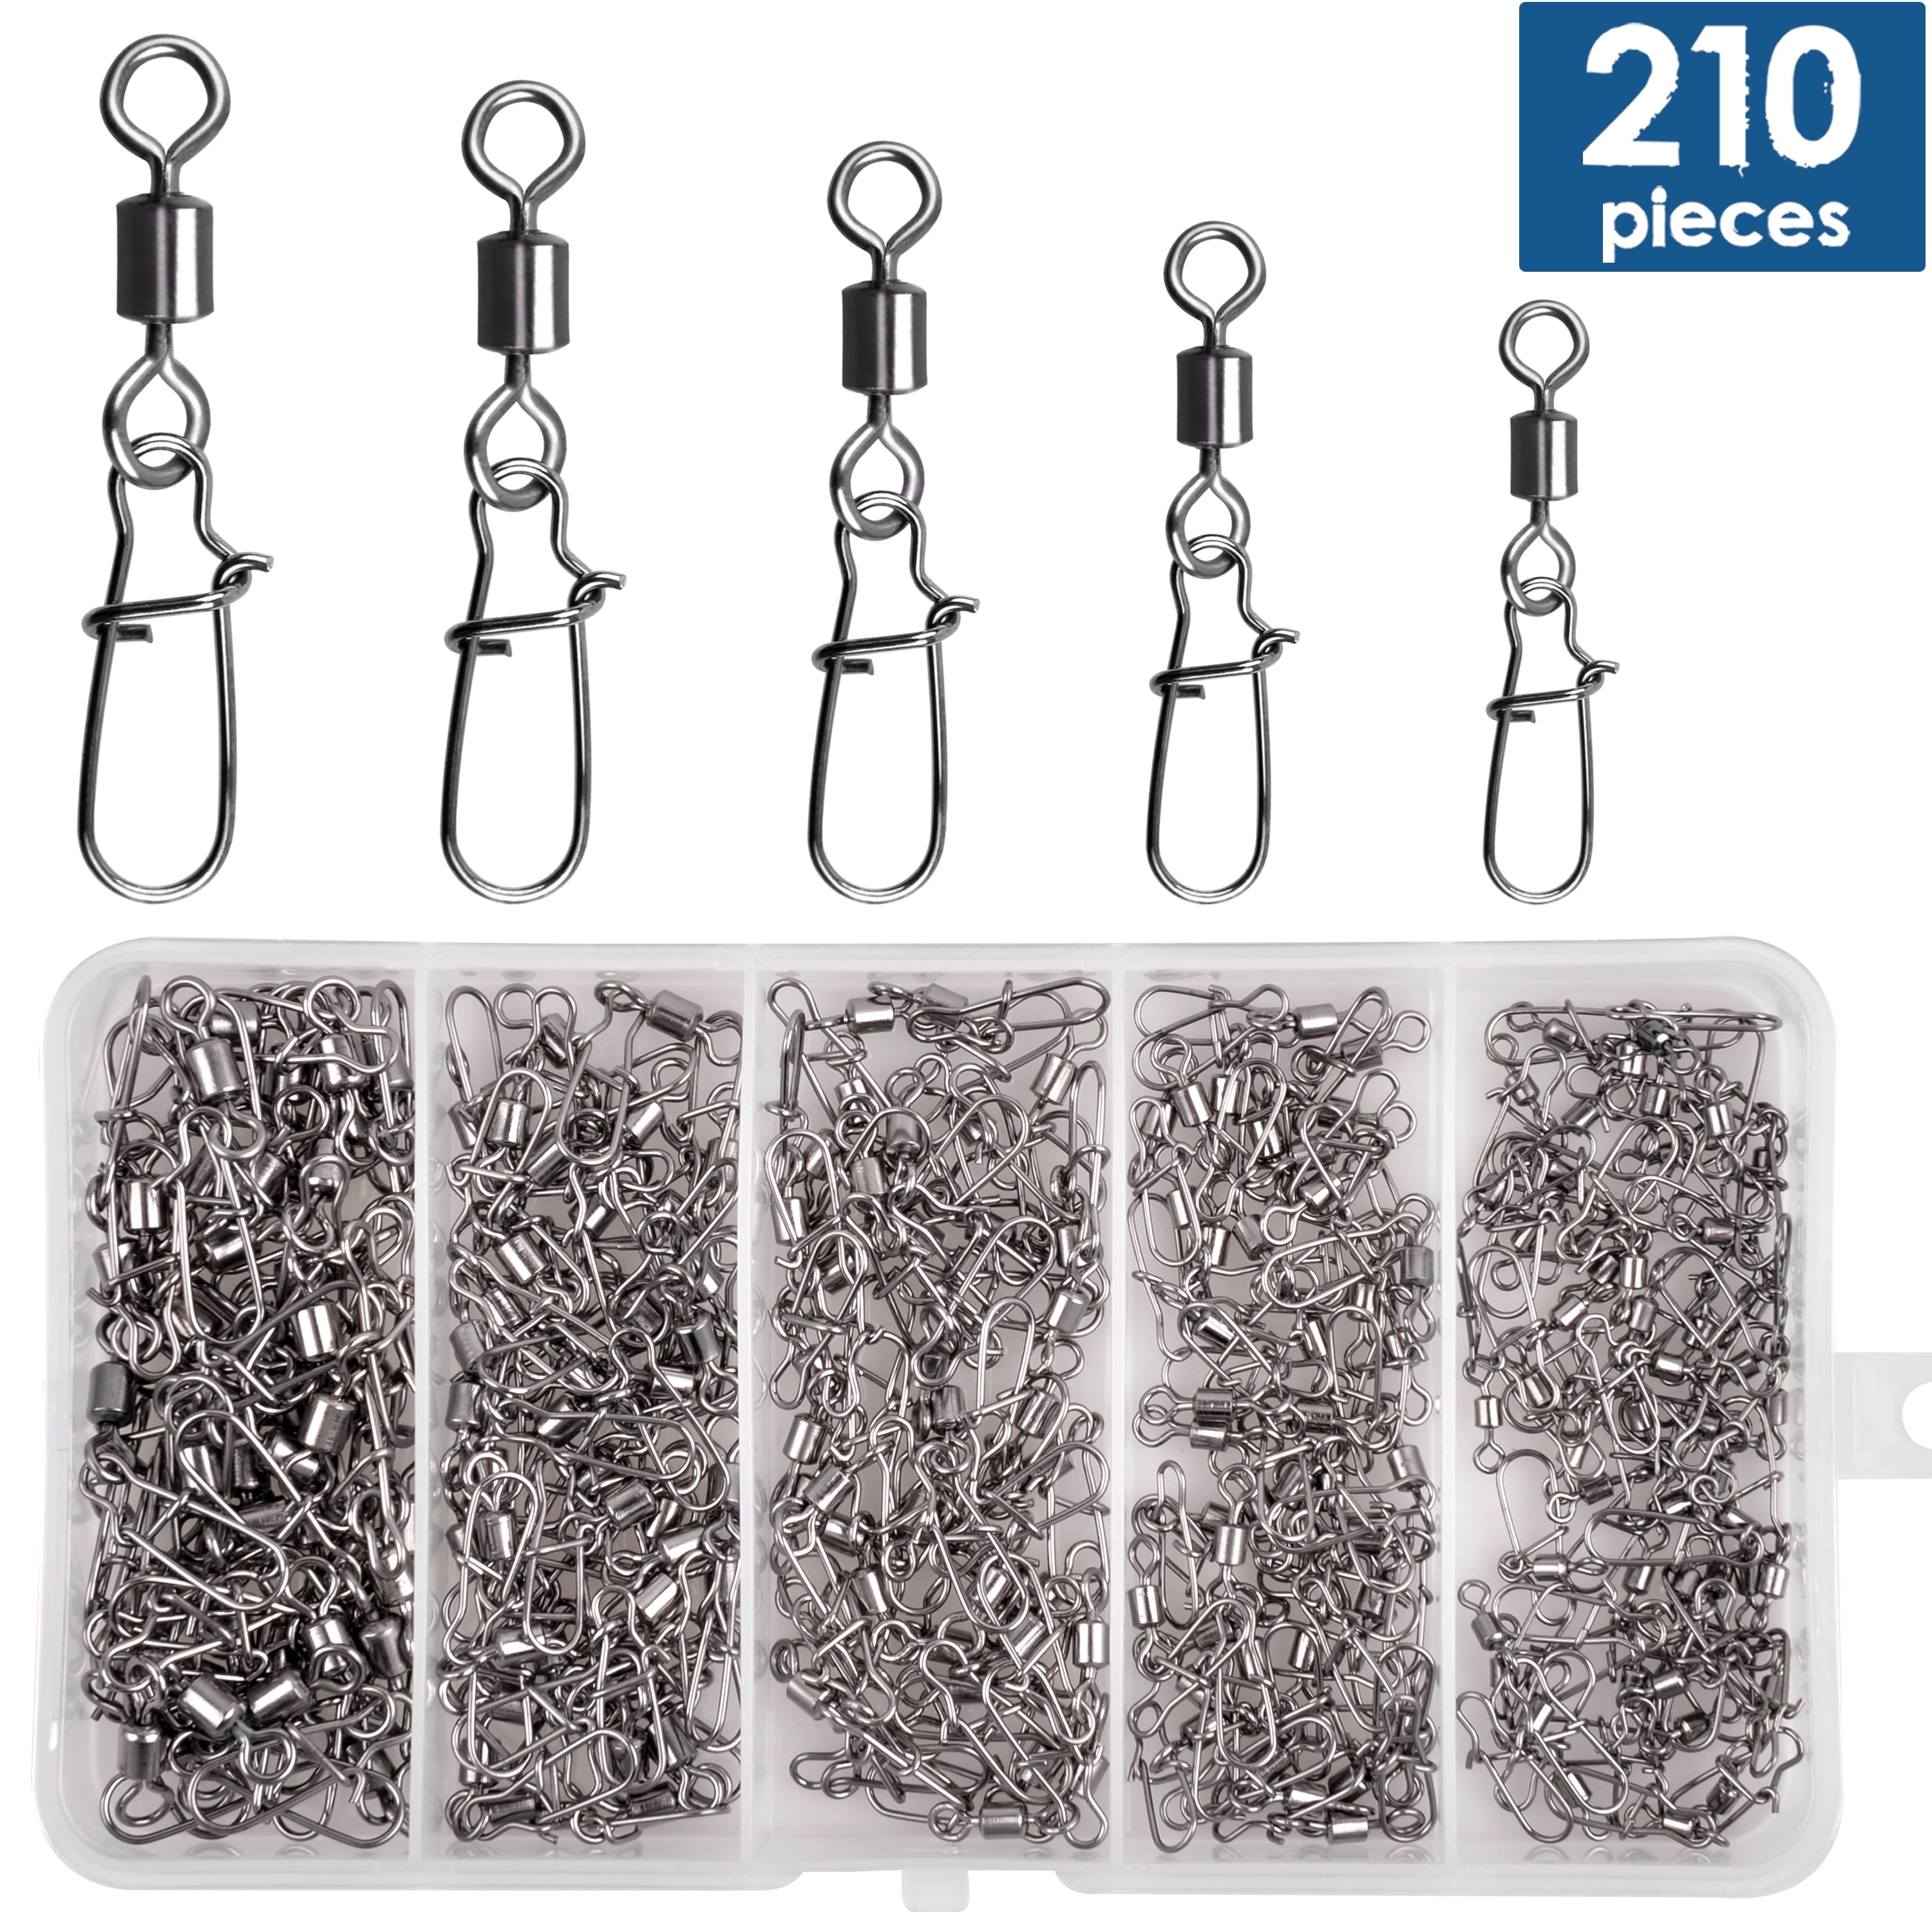 30X Fish Fishing Barrel Swivel with Interlock Snaps High Strength Safety  Tackle